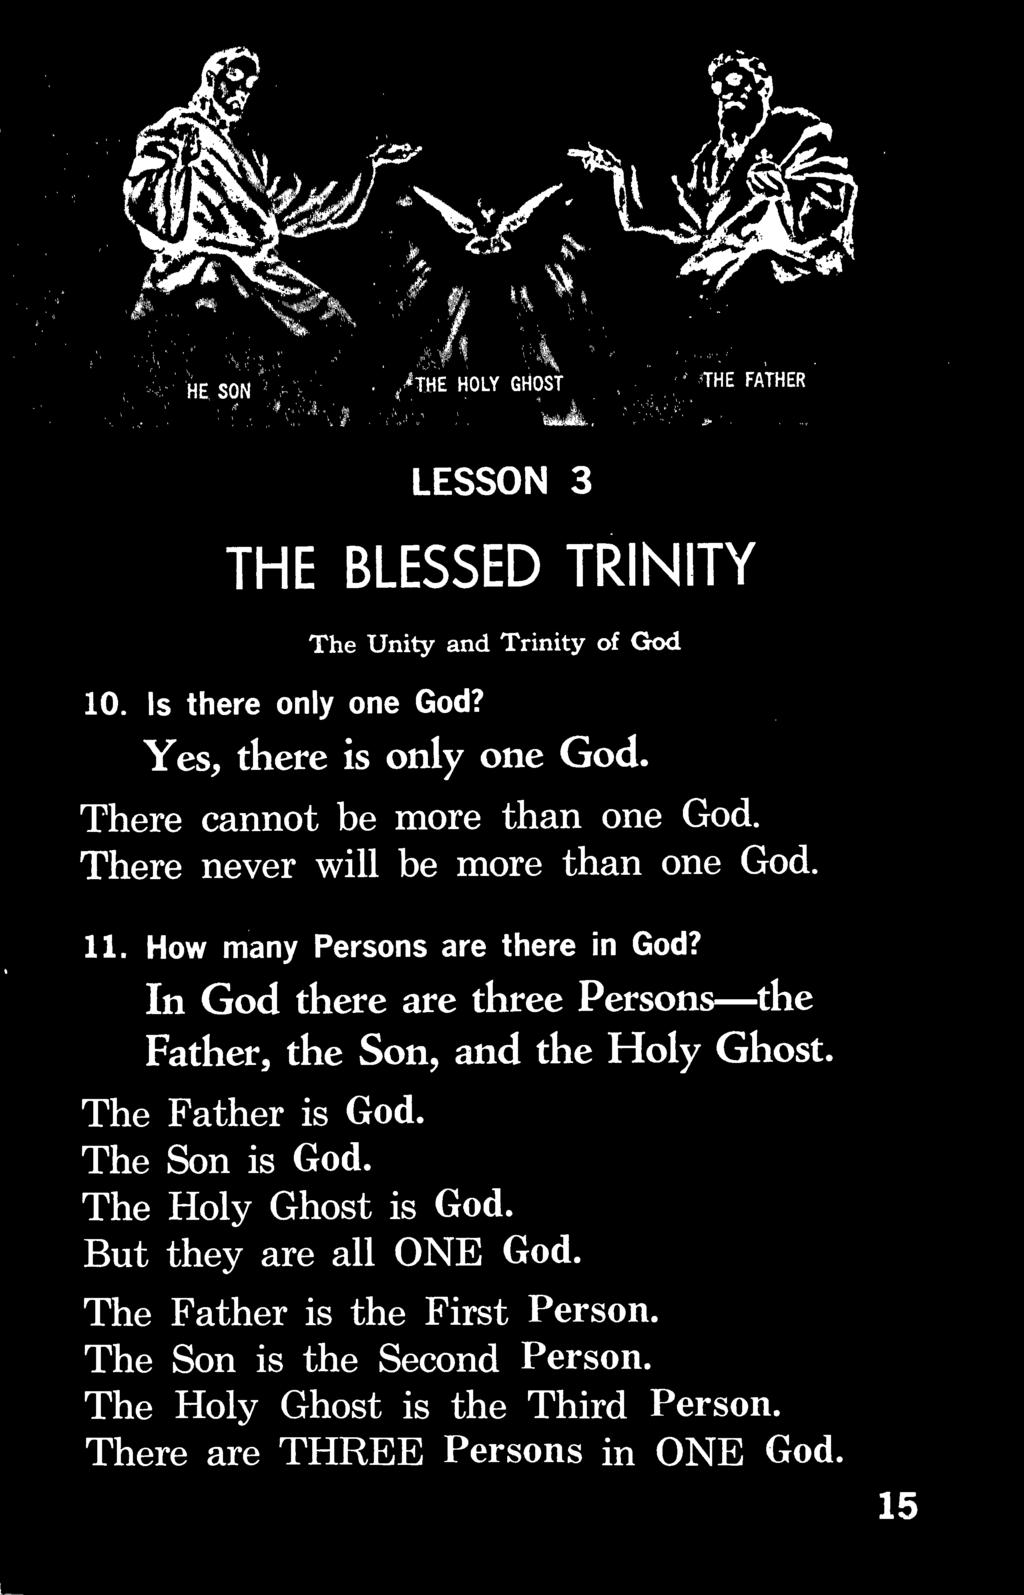 In God there are three Persons the Father, the Son, and the Holy Ghost. The Father is God. The Son is God. The Holy Ghost is God.